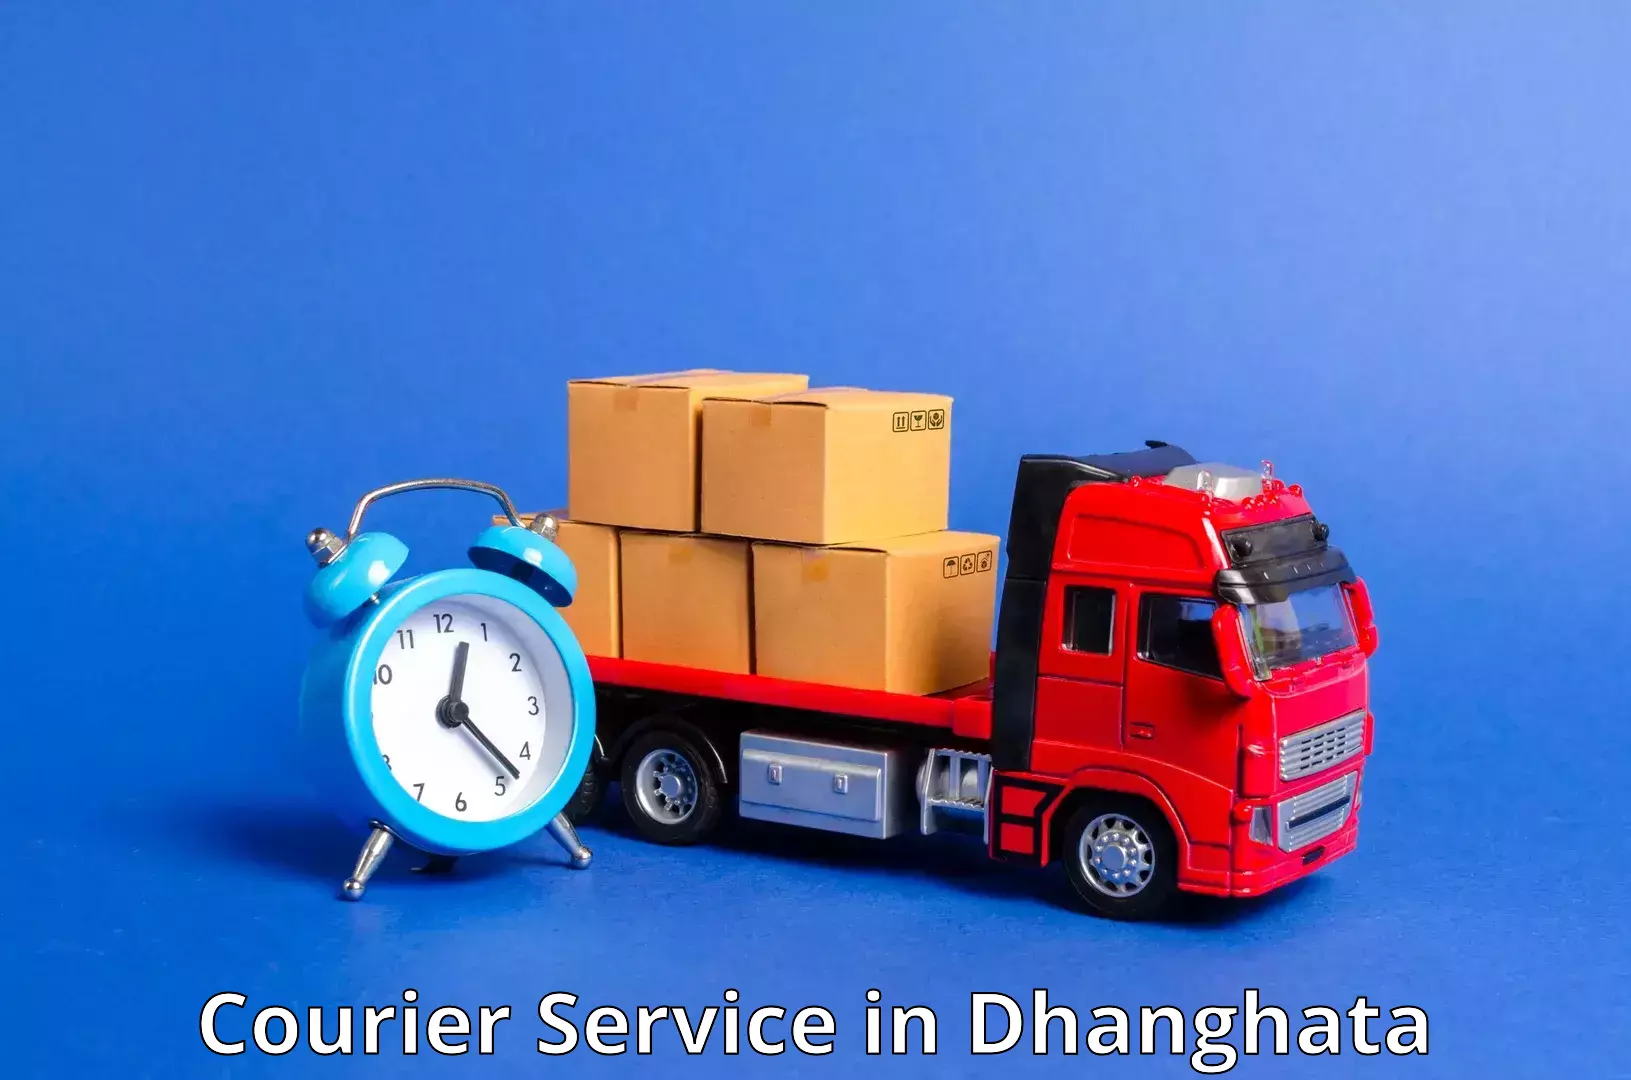 Sustainable shipping practices in Dhanghata